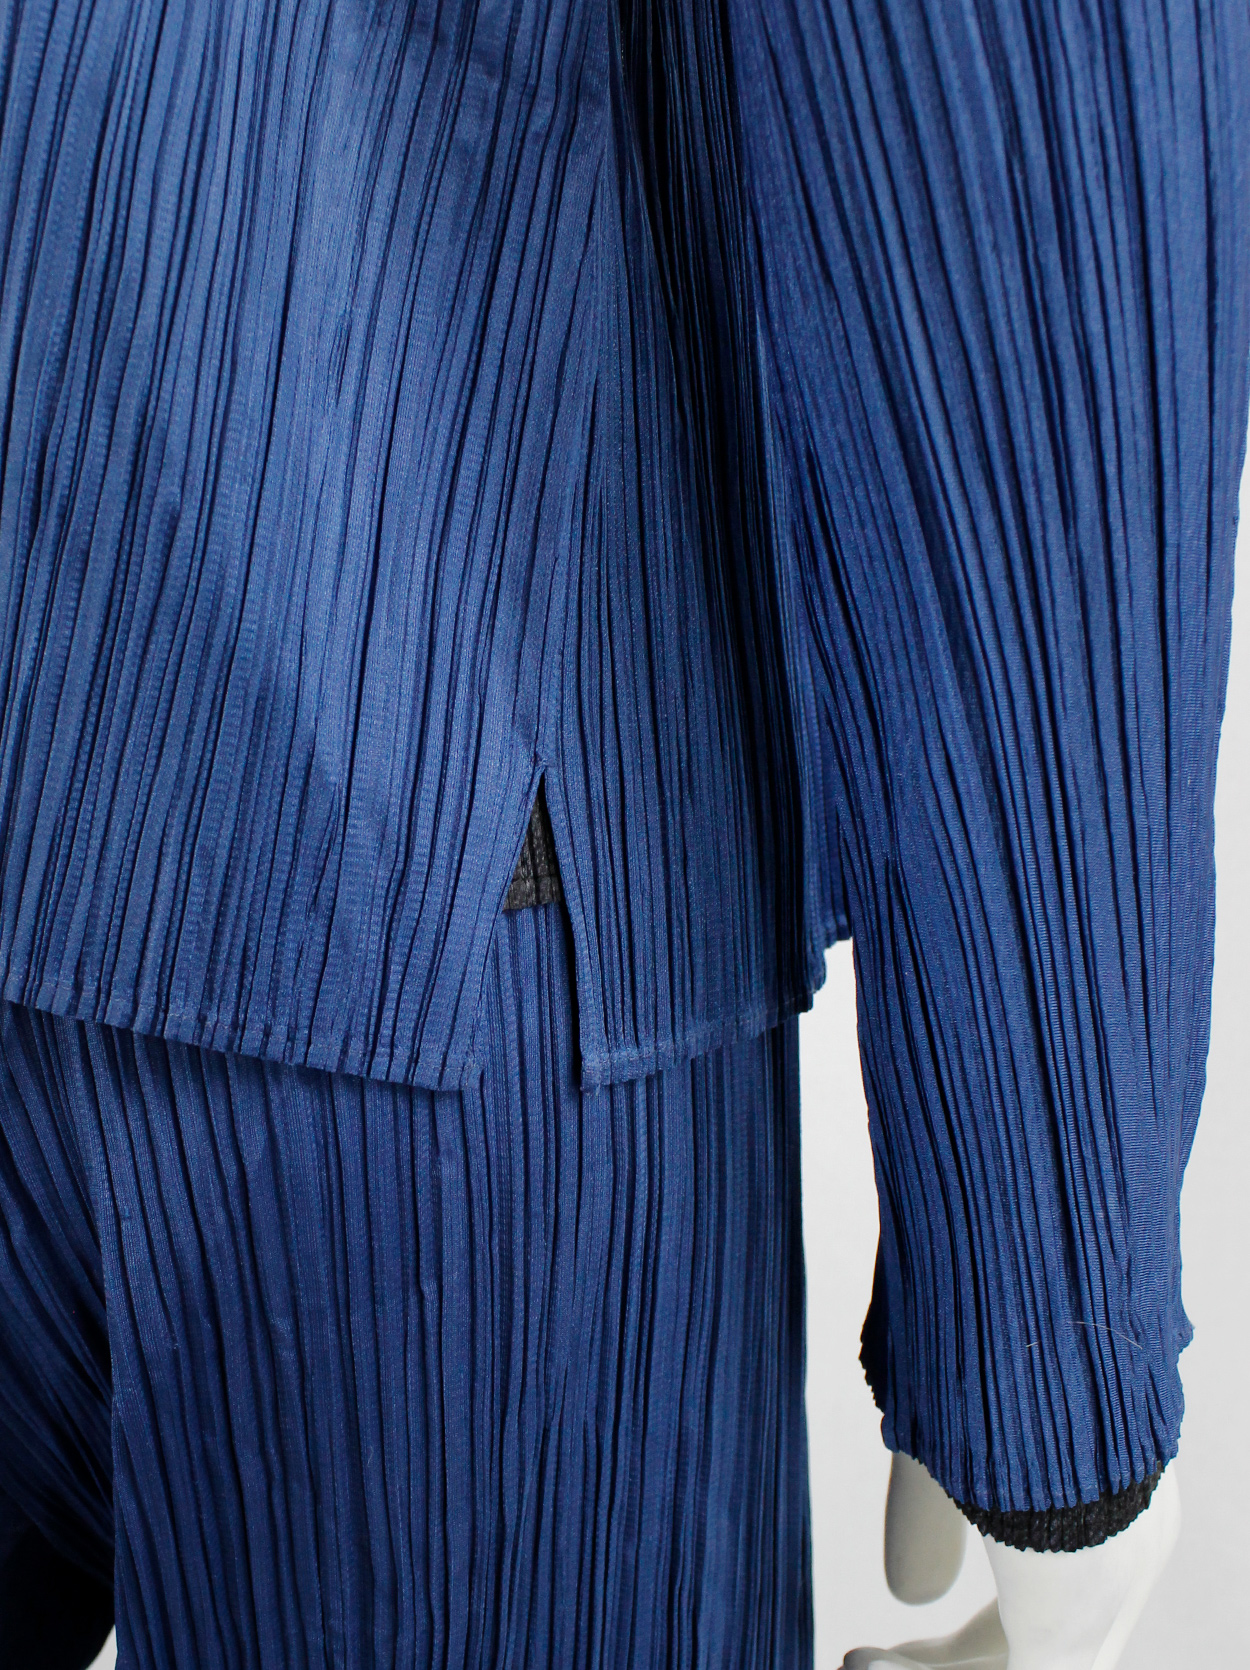 Issey Miyake Pleats Please bright blue cardigan with curved open front ...